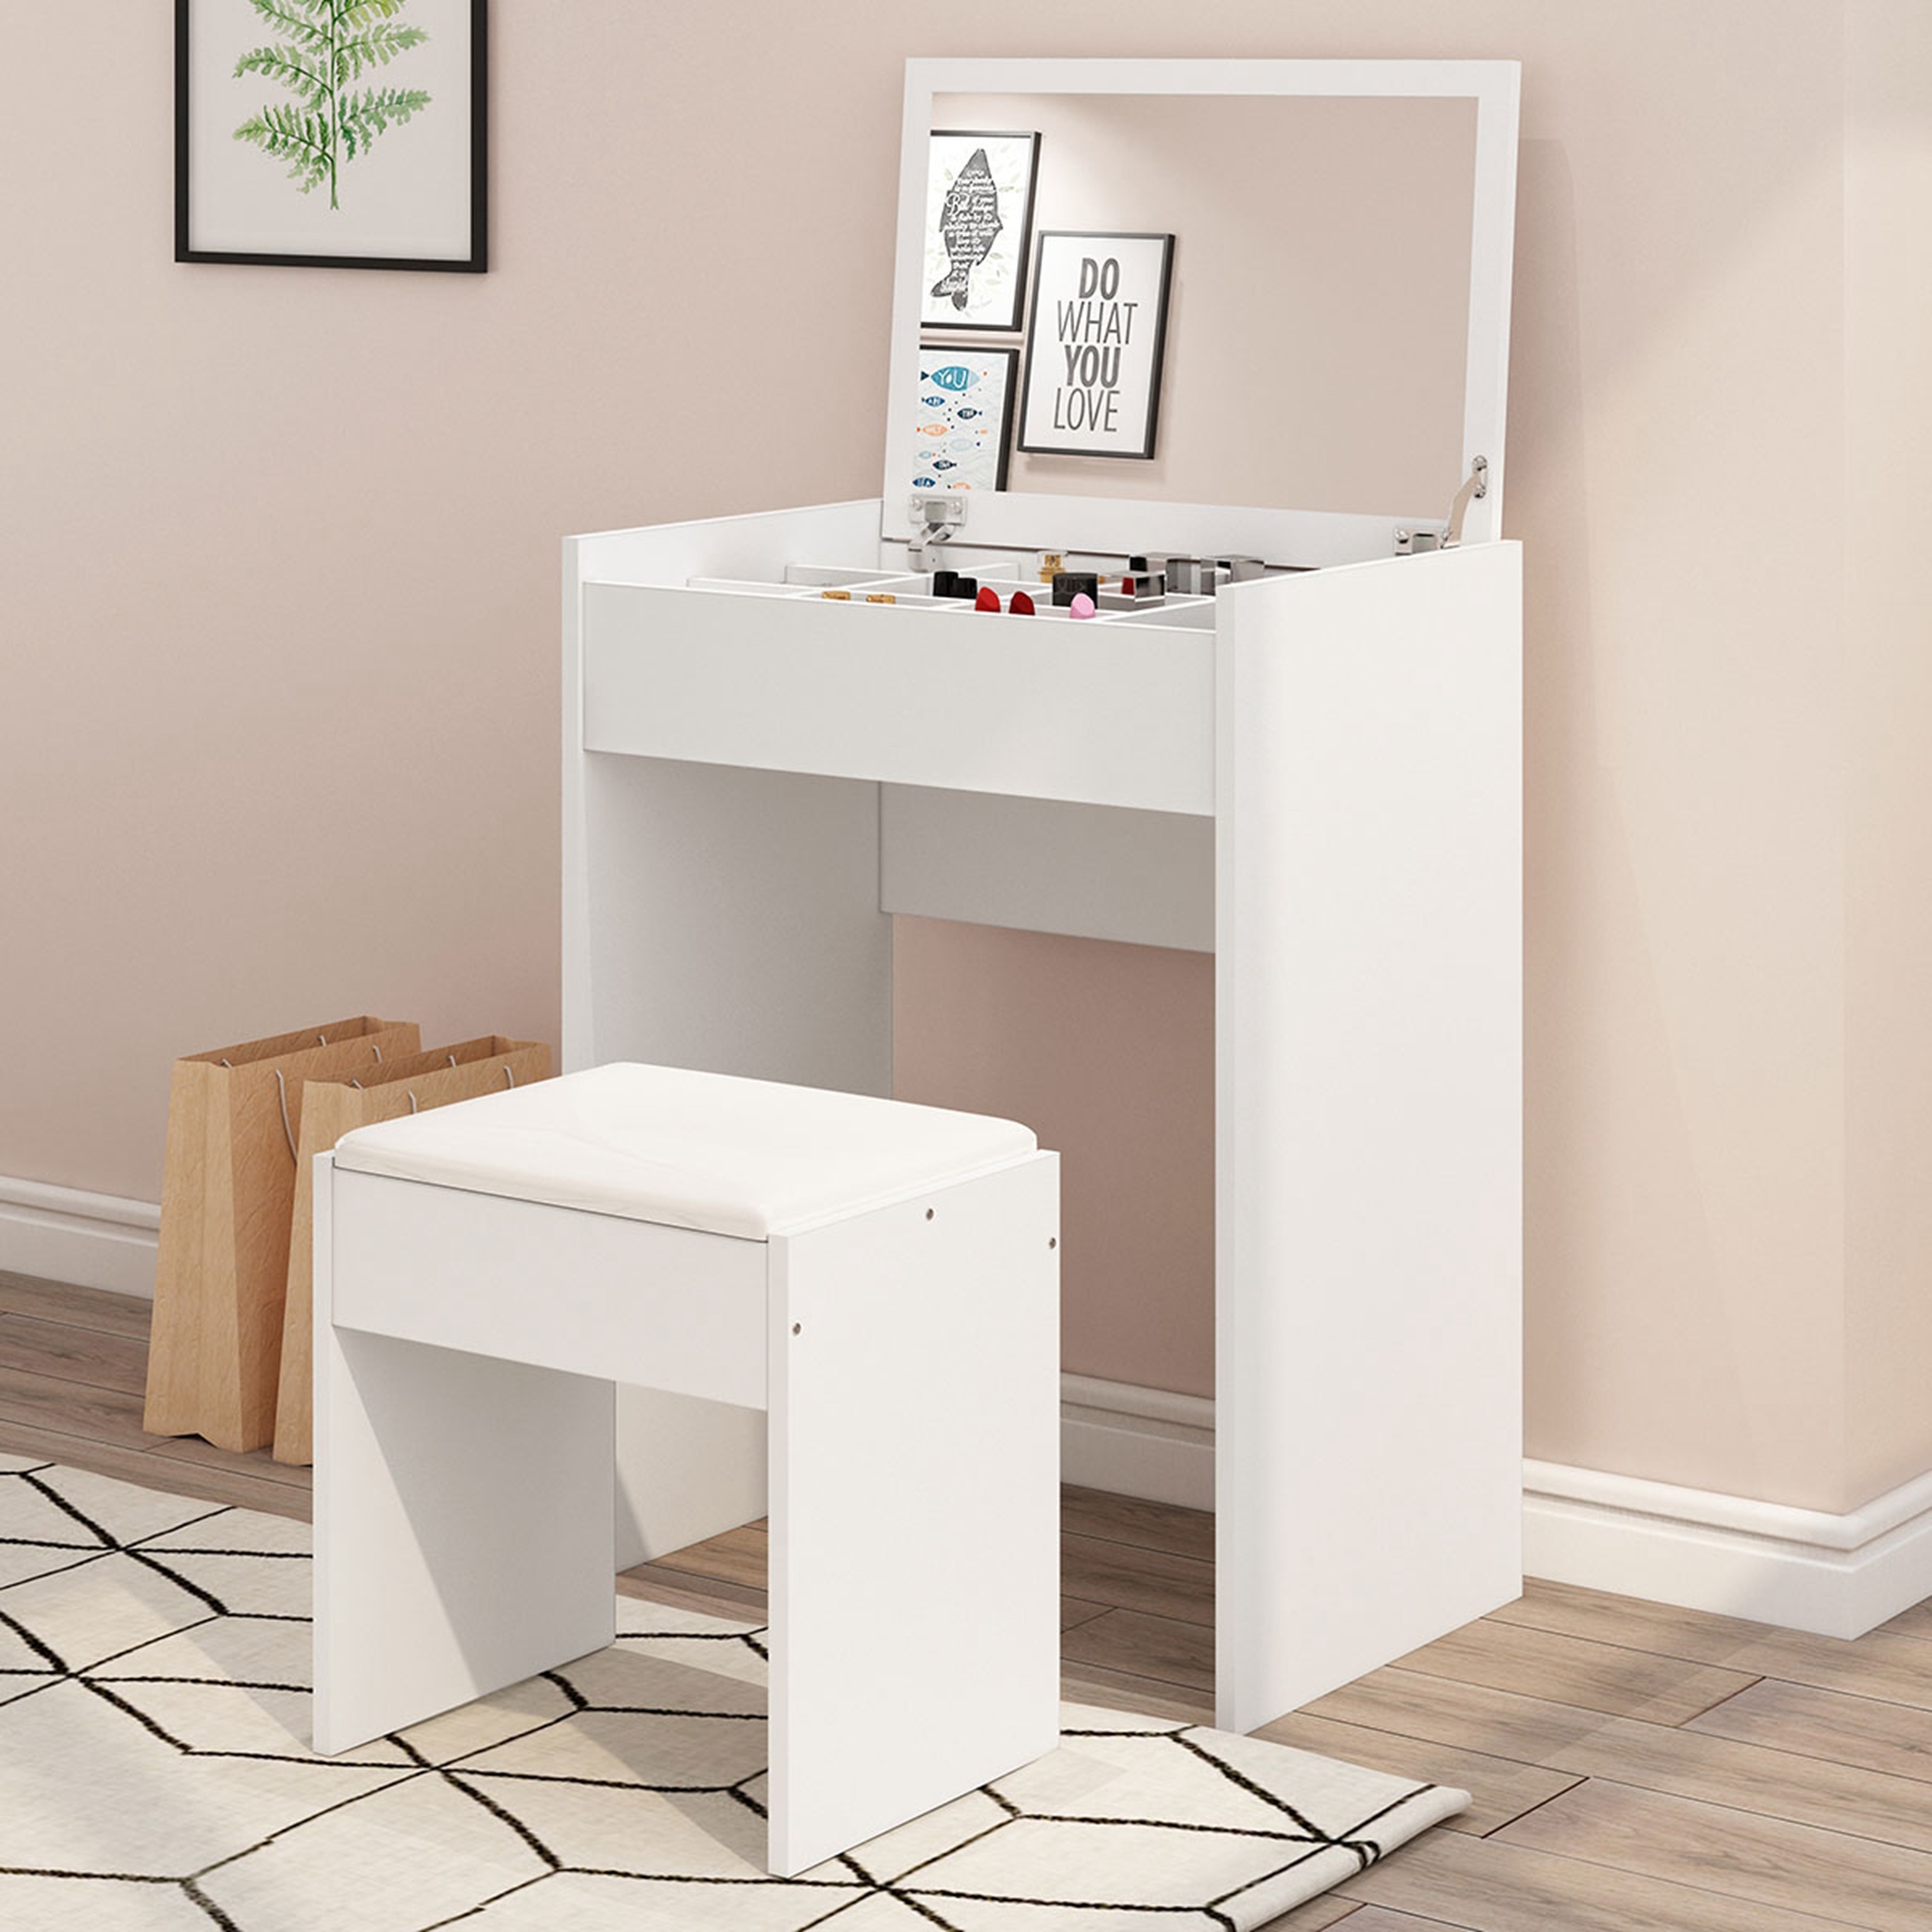 Jaxpety Small Modern Dressing Table Set, Small Bedroom Vanity With Storage